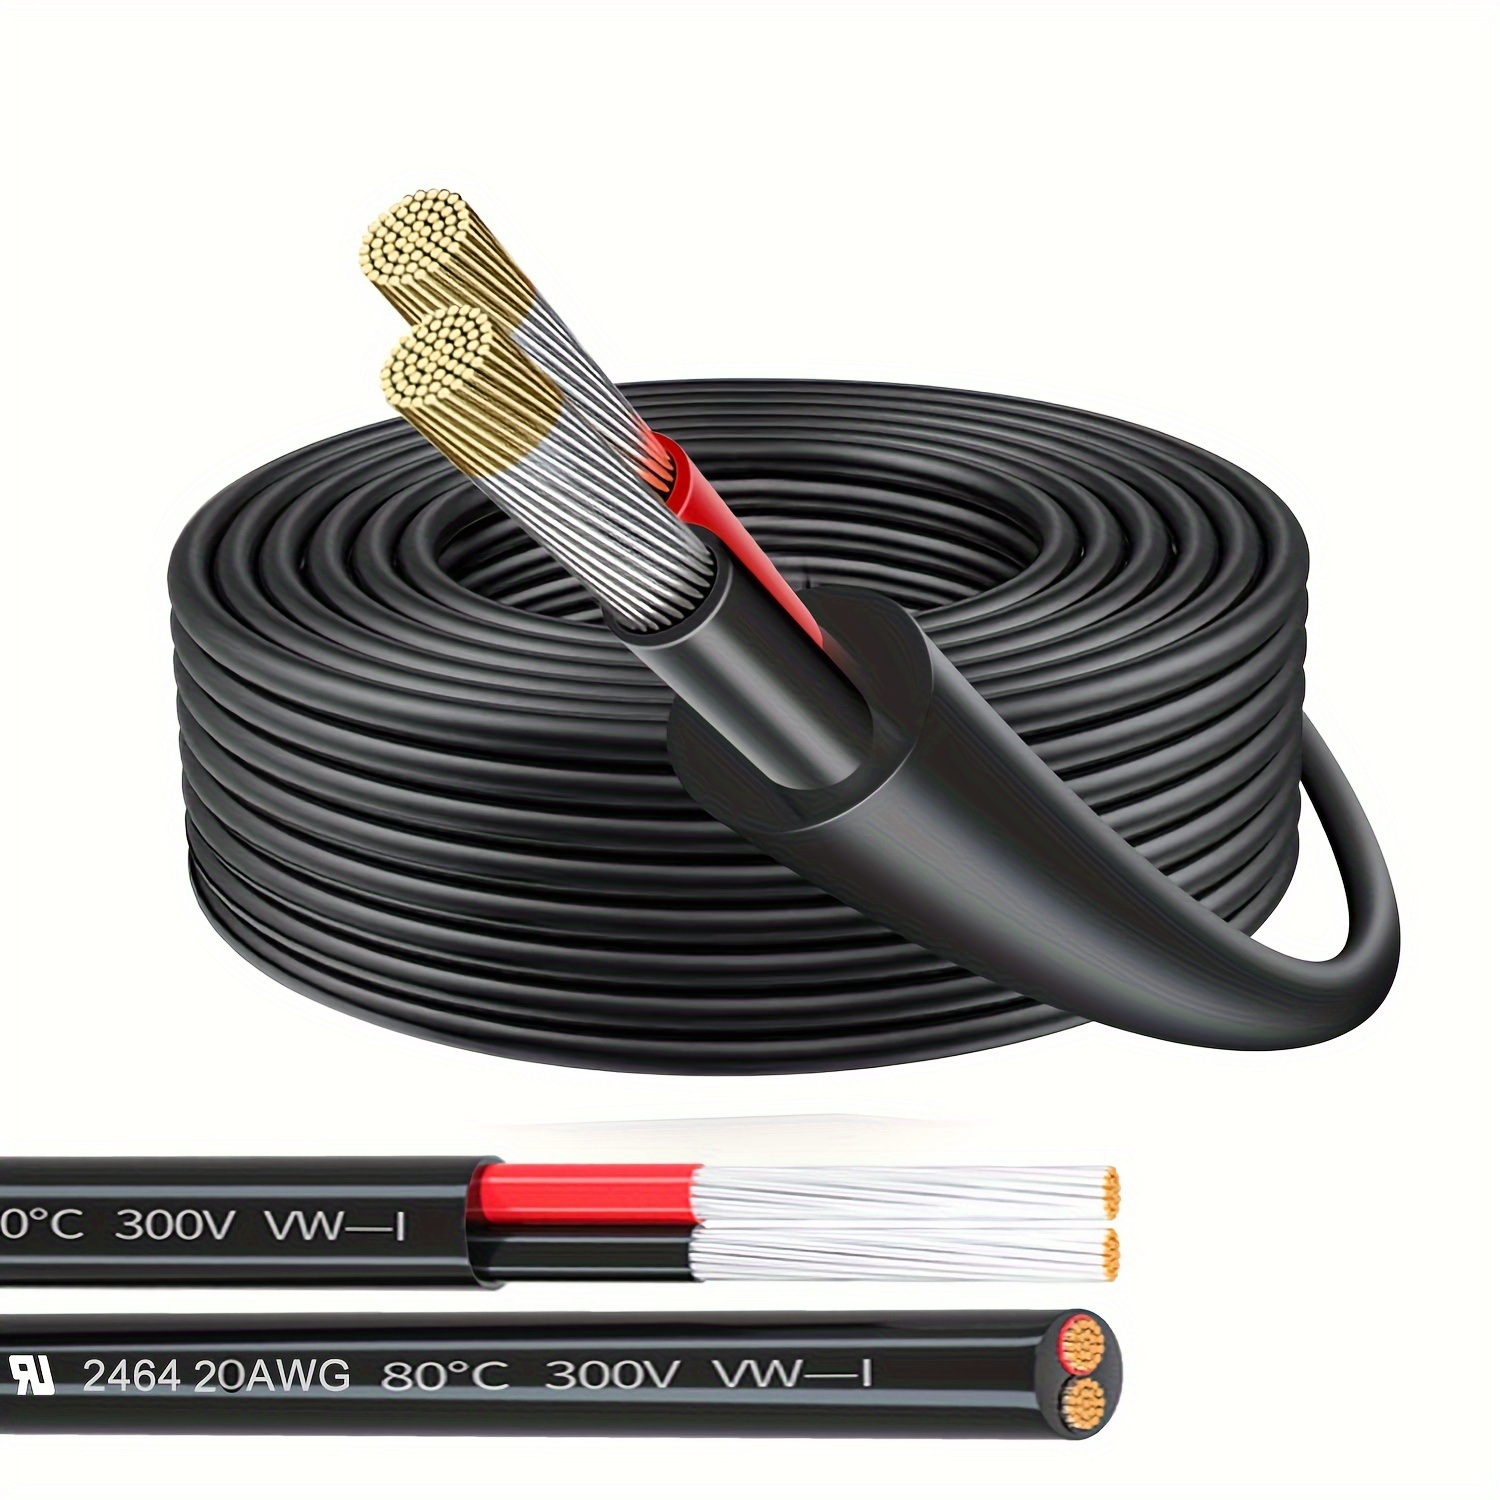 16 AWG Stranded Electrical Wire 16 Gauge Tinned Copper Wires Flexible  Silicone Electric Hook Up Wire Kit OD:2.5mm, 5 Colors 13.1ft/4m Each,  DIY/Automotive/Home/Power Wiring Kit: : Tools & Home Improvement